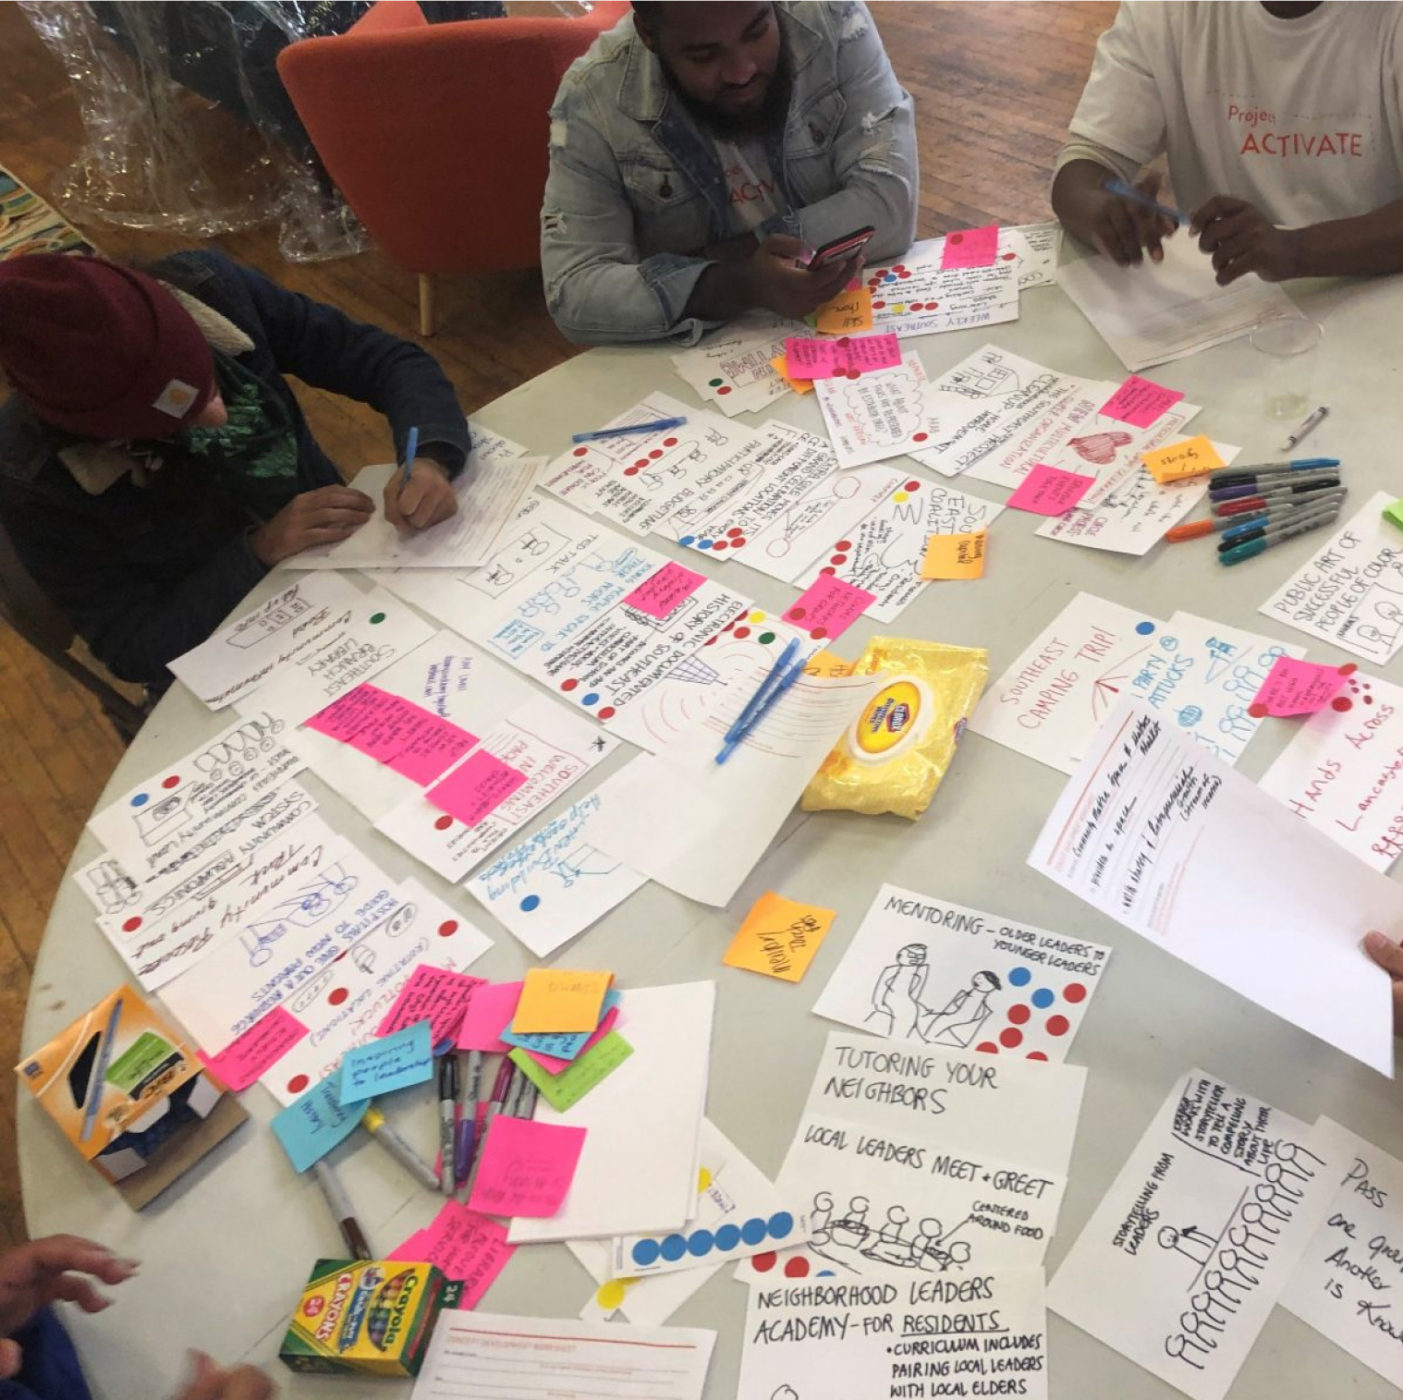 overheat shot of a large round table, white tablecloth, covered with white sheets of paper and colorful post-it notes, also markers and colored dot stickers. four people sit around the table, one medium-skinned man with a dark red ski cap is writing, the others are dark-skinned and either gesturing with their hands or looking at their phone.